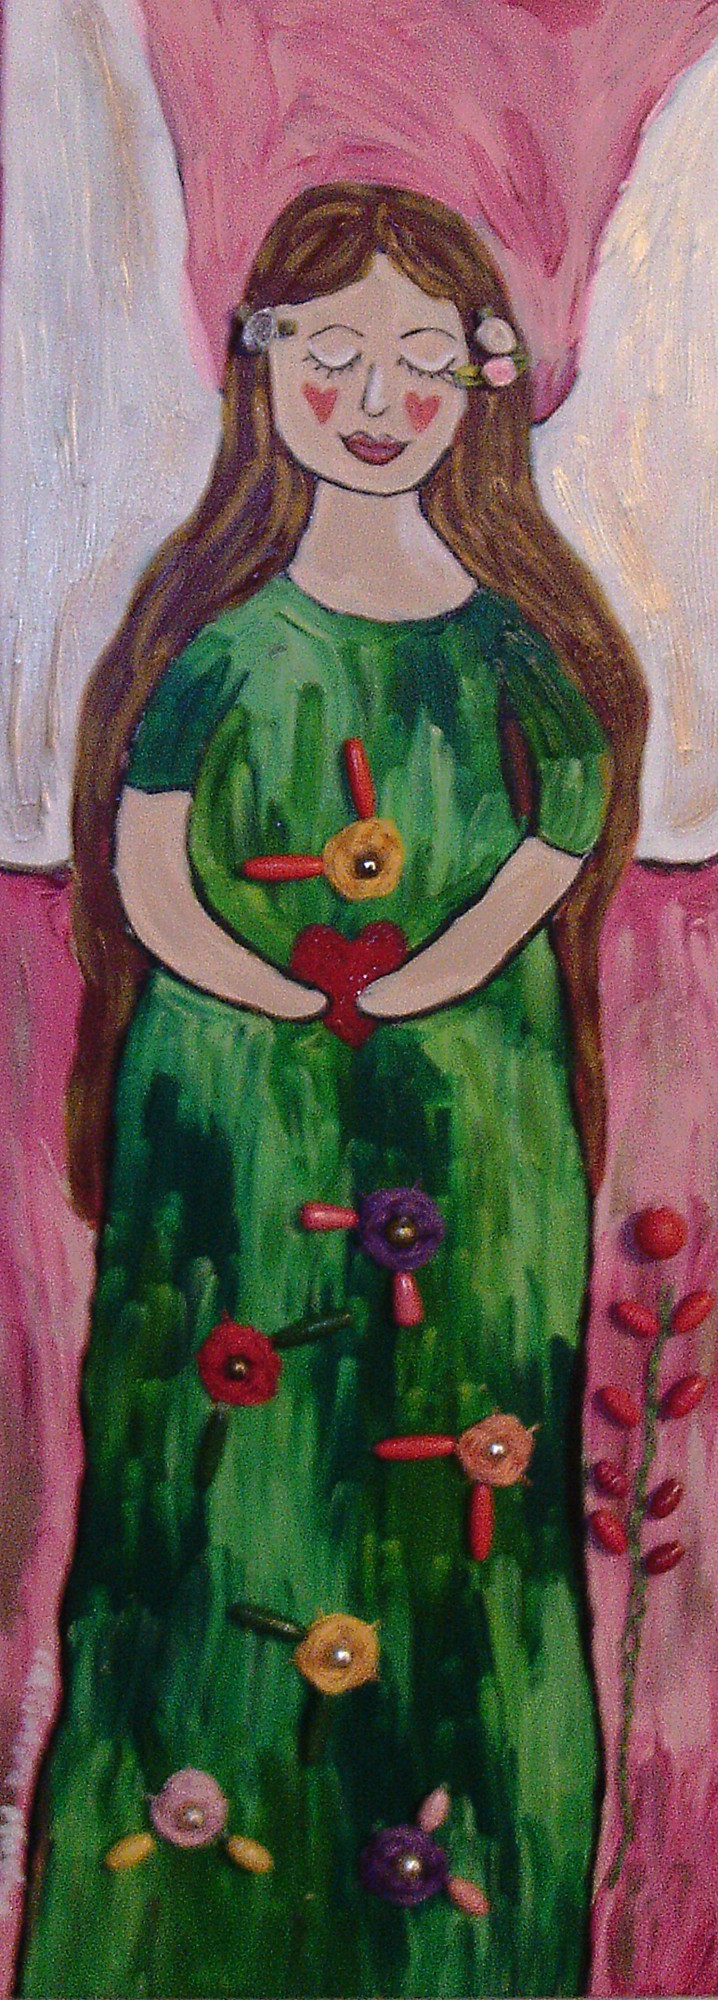 Angel of Love  acrylic painting on canvas 9